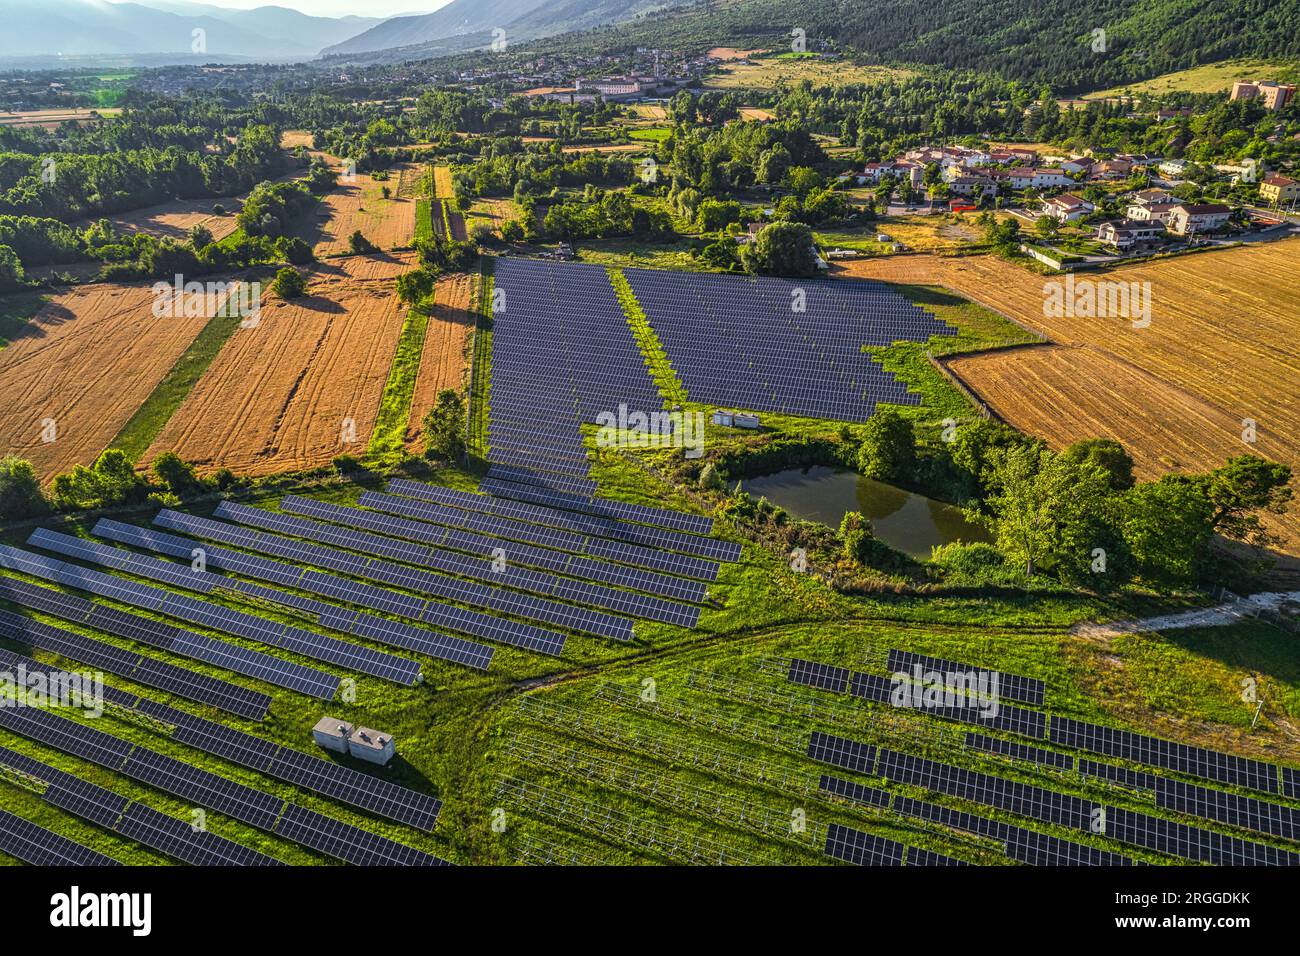 Field of solar panels for the production of renewable and non-polluting energy. Abruzzo, Italy, Europe Stock Photo